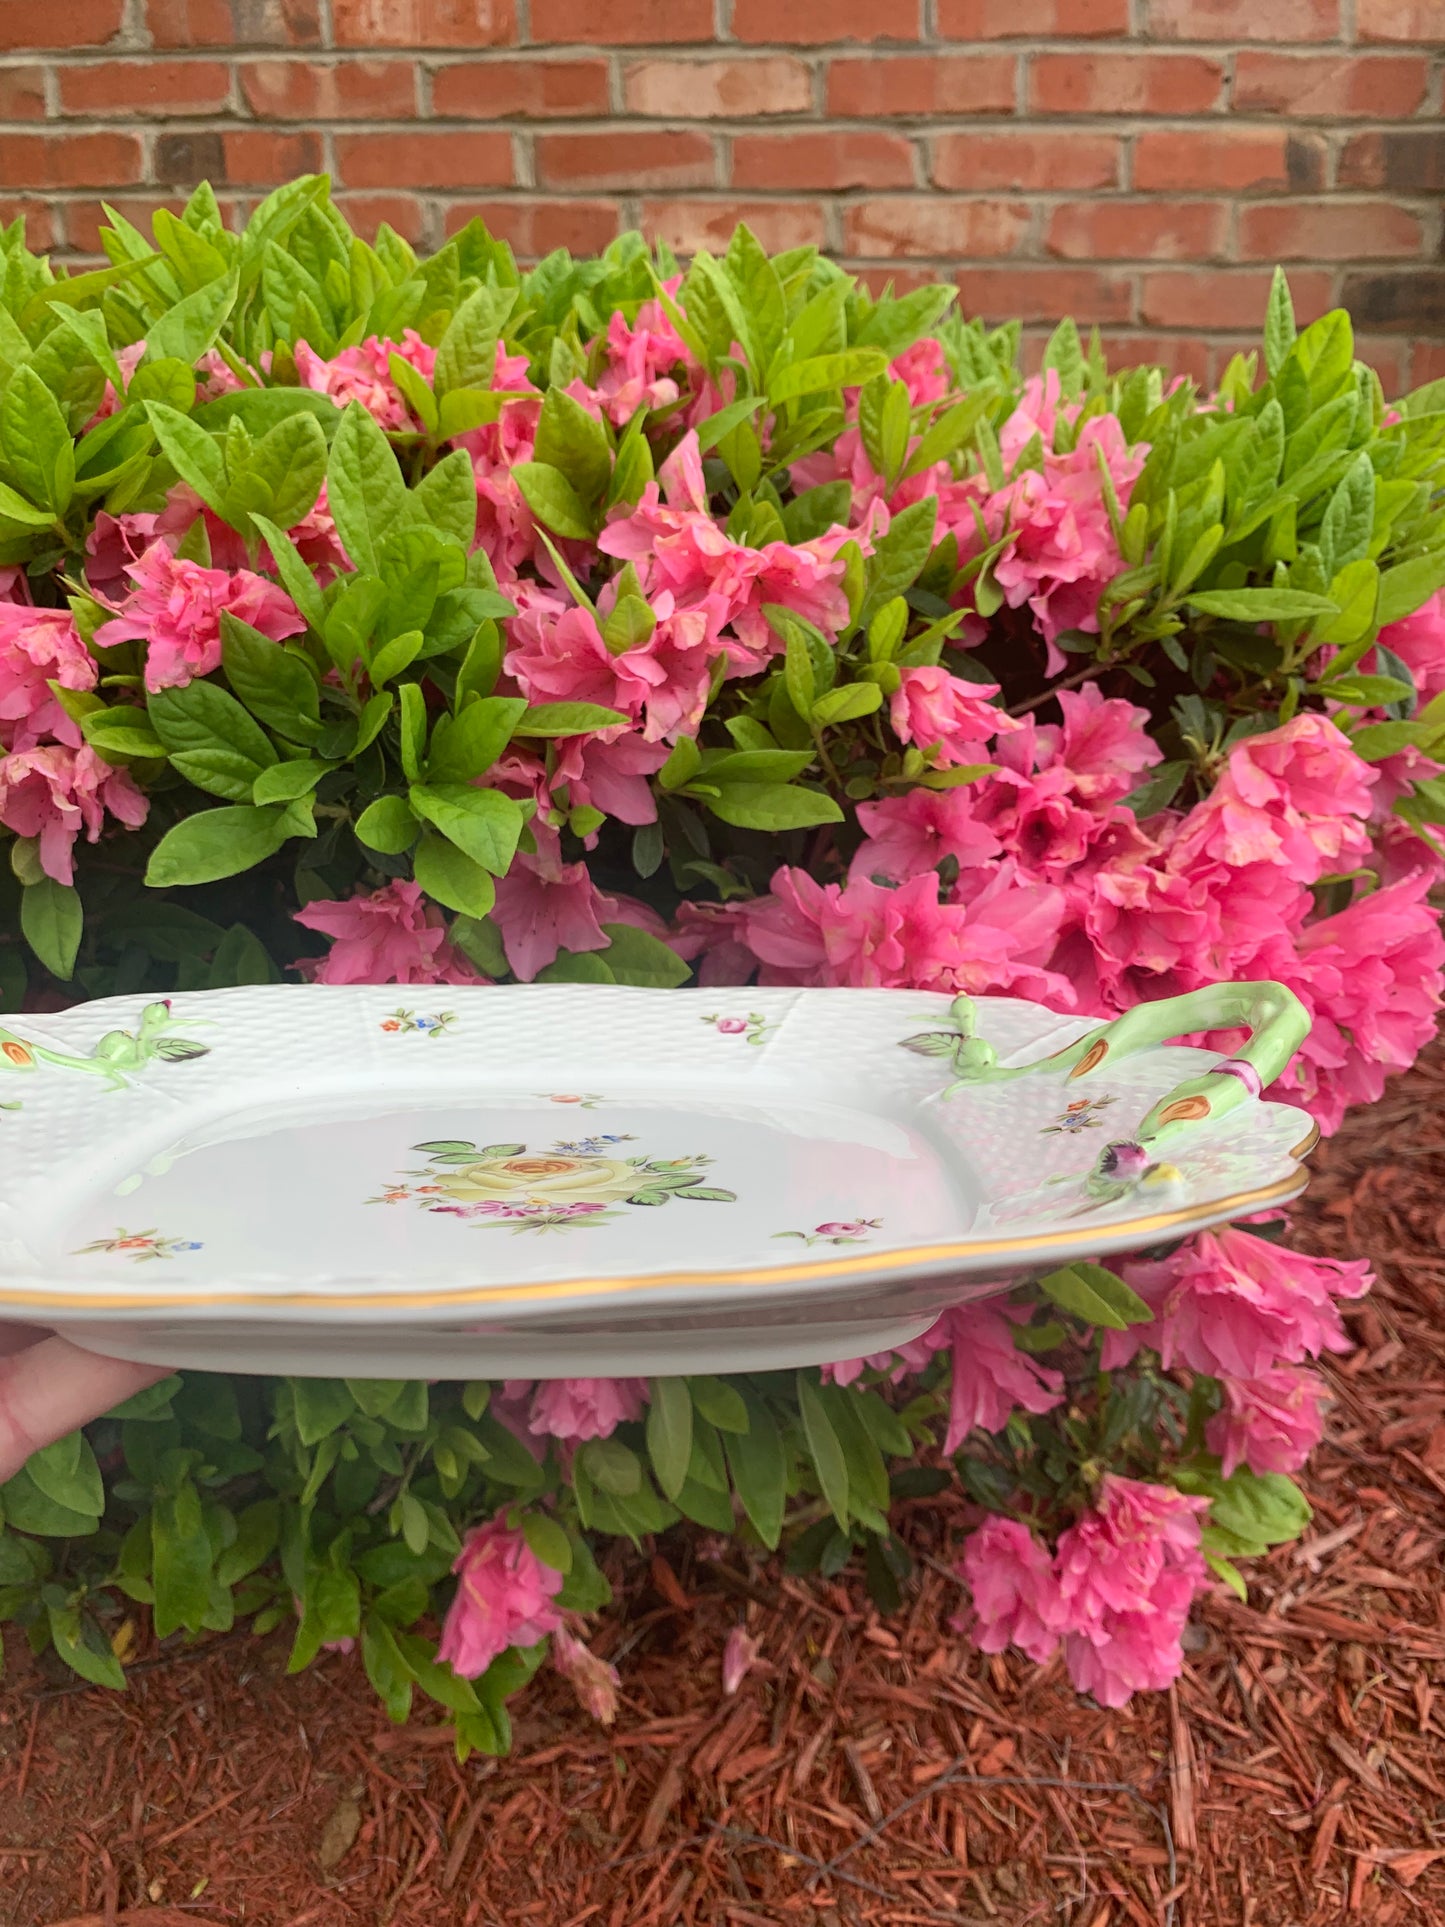 Absolutely stunning Herend platter with raised ornate handles with bud flowers! - Excellent condition!